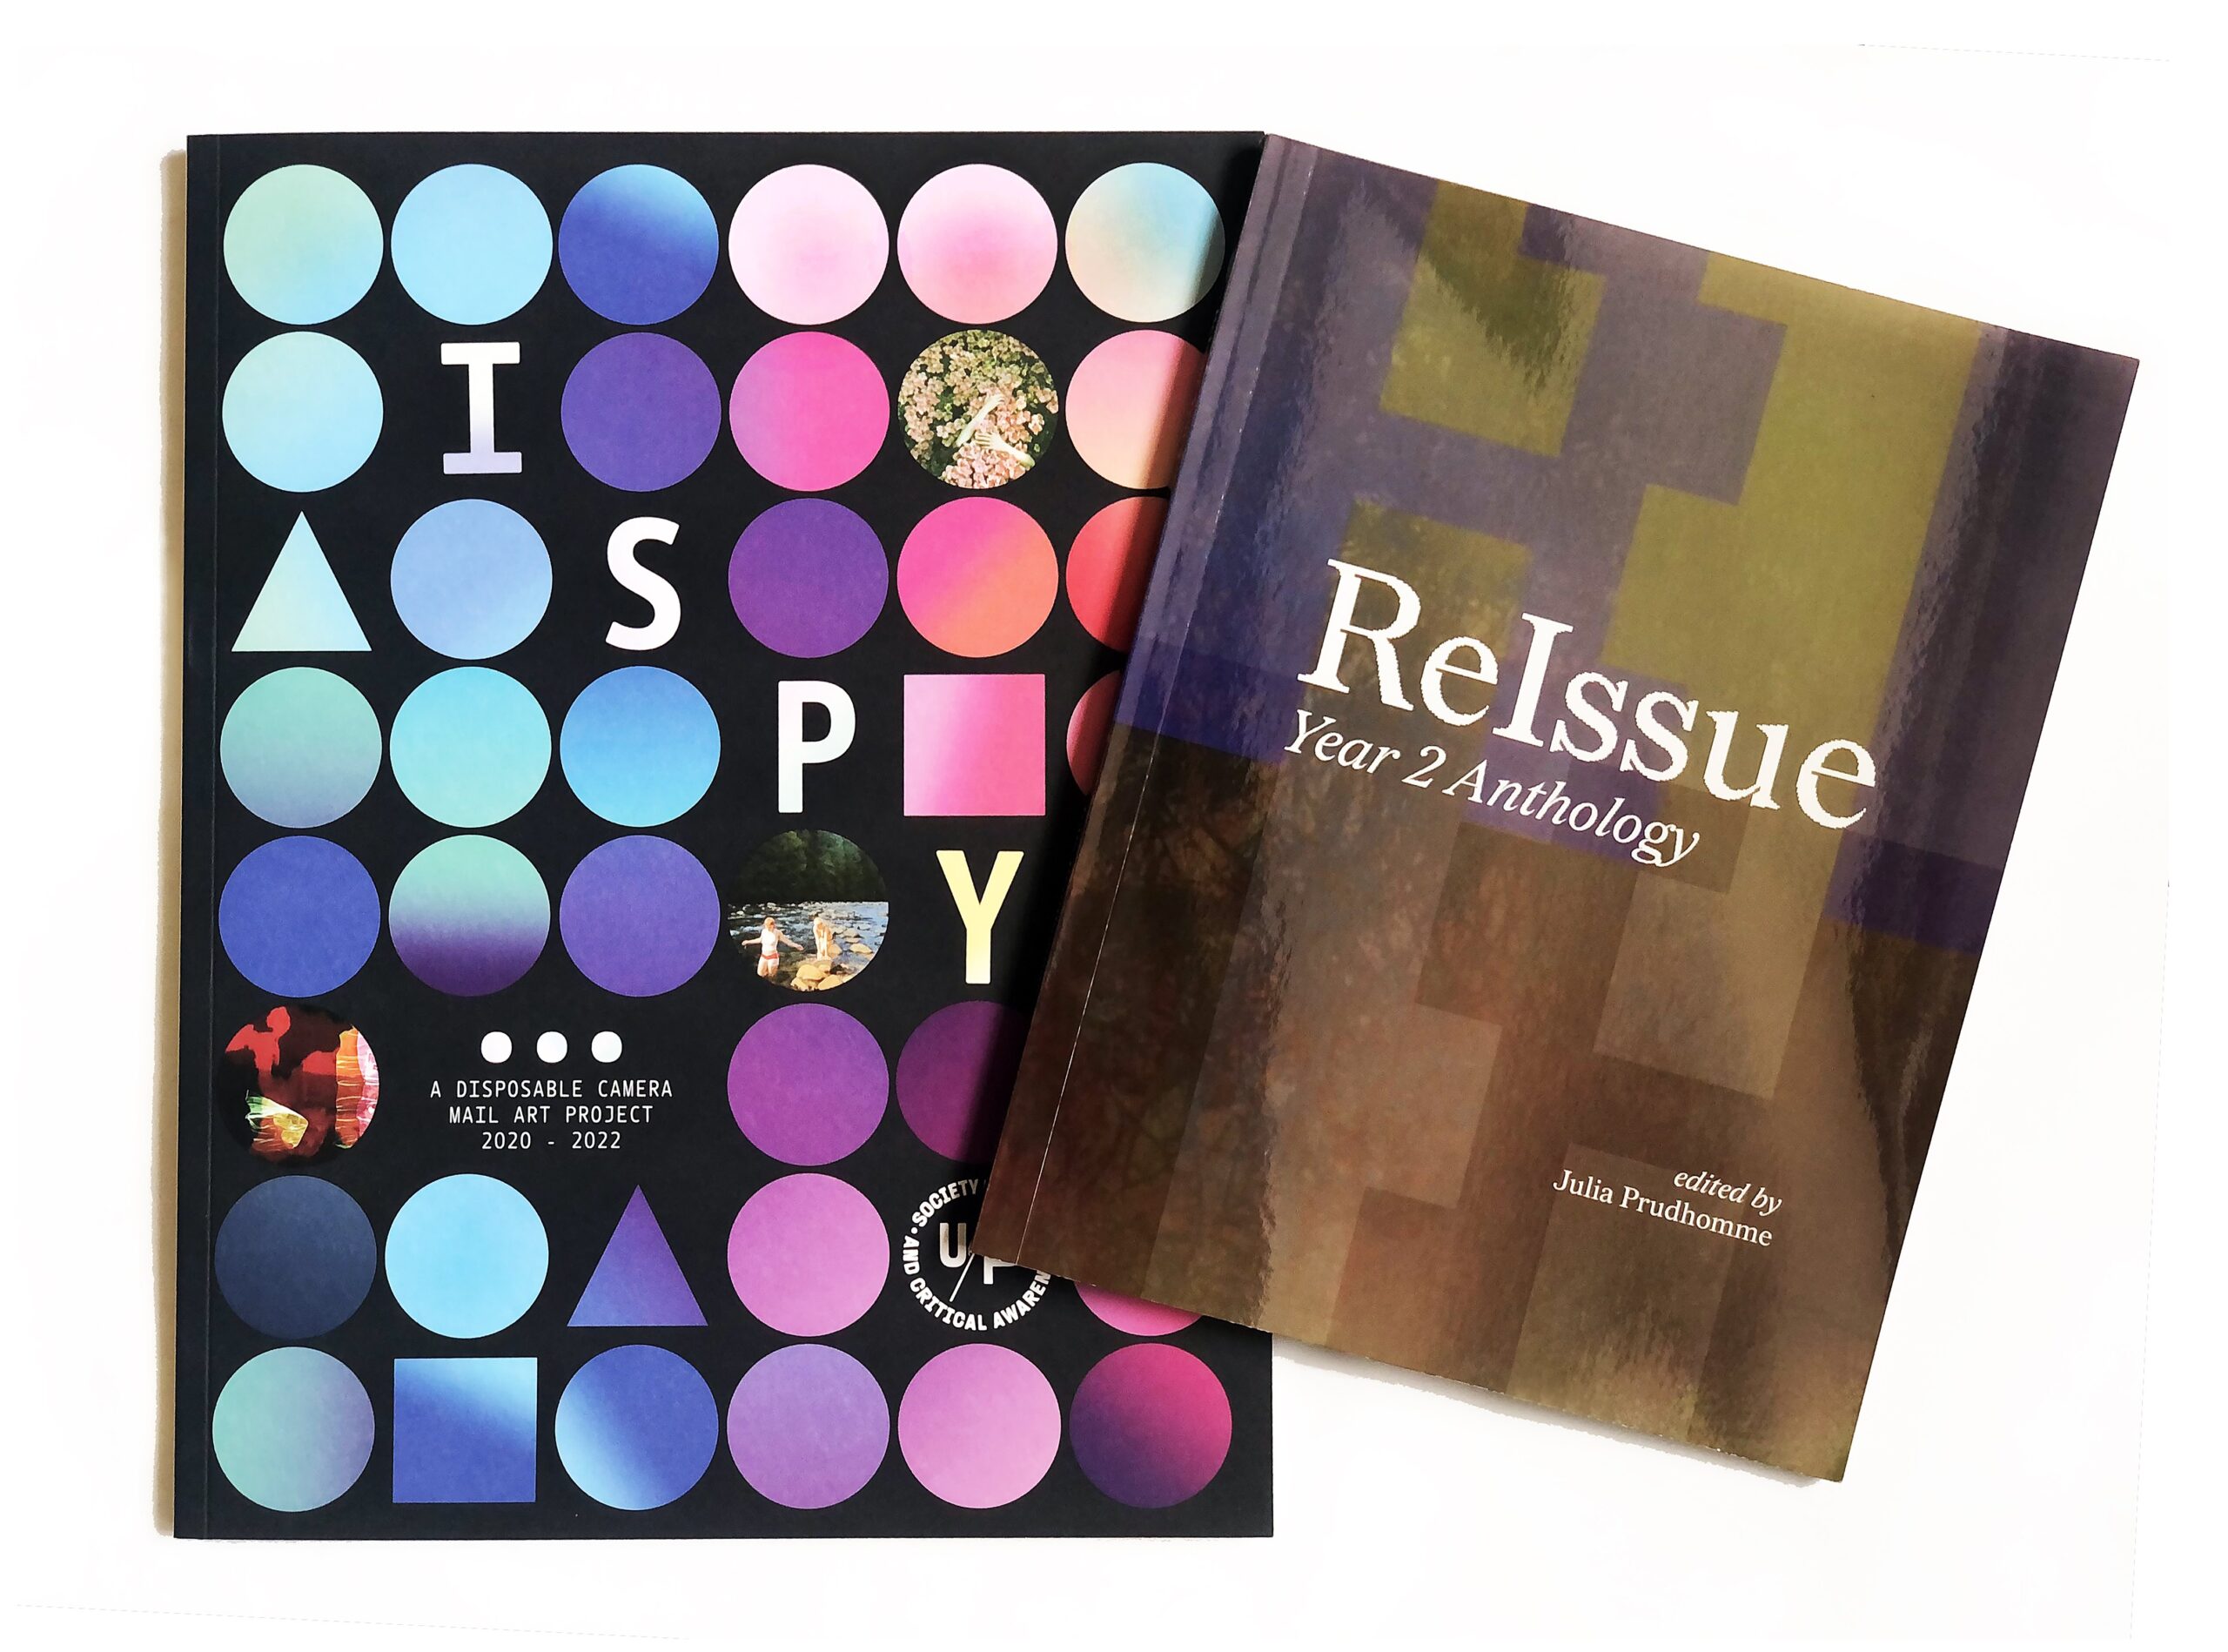 Two publications on a white background. I SPY catalogue has blue and pink dots in a grid form on a black background. ReIssue Year 2 Anthology has white text on an abstract green, purple, and brown background.